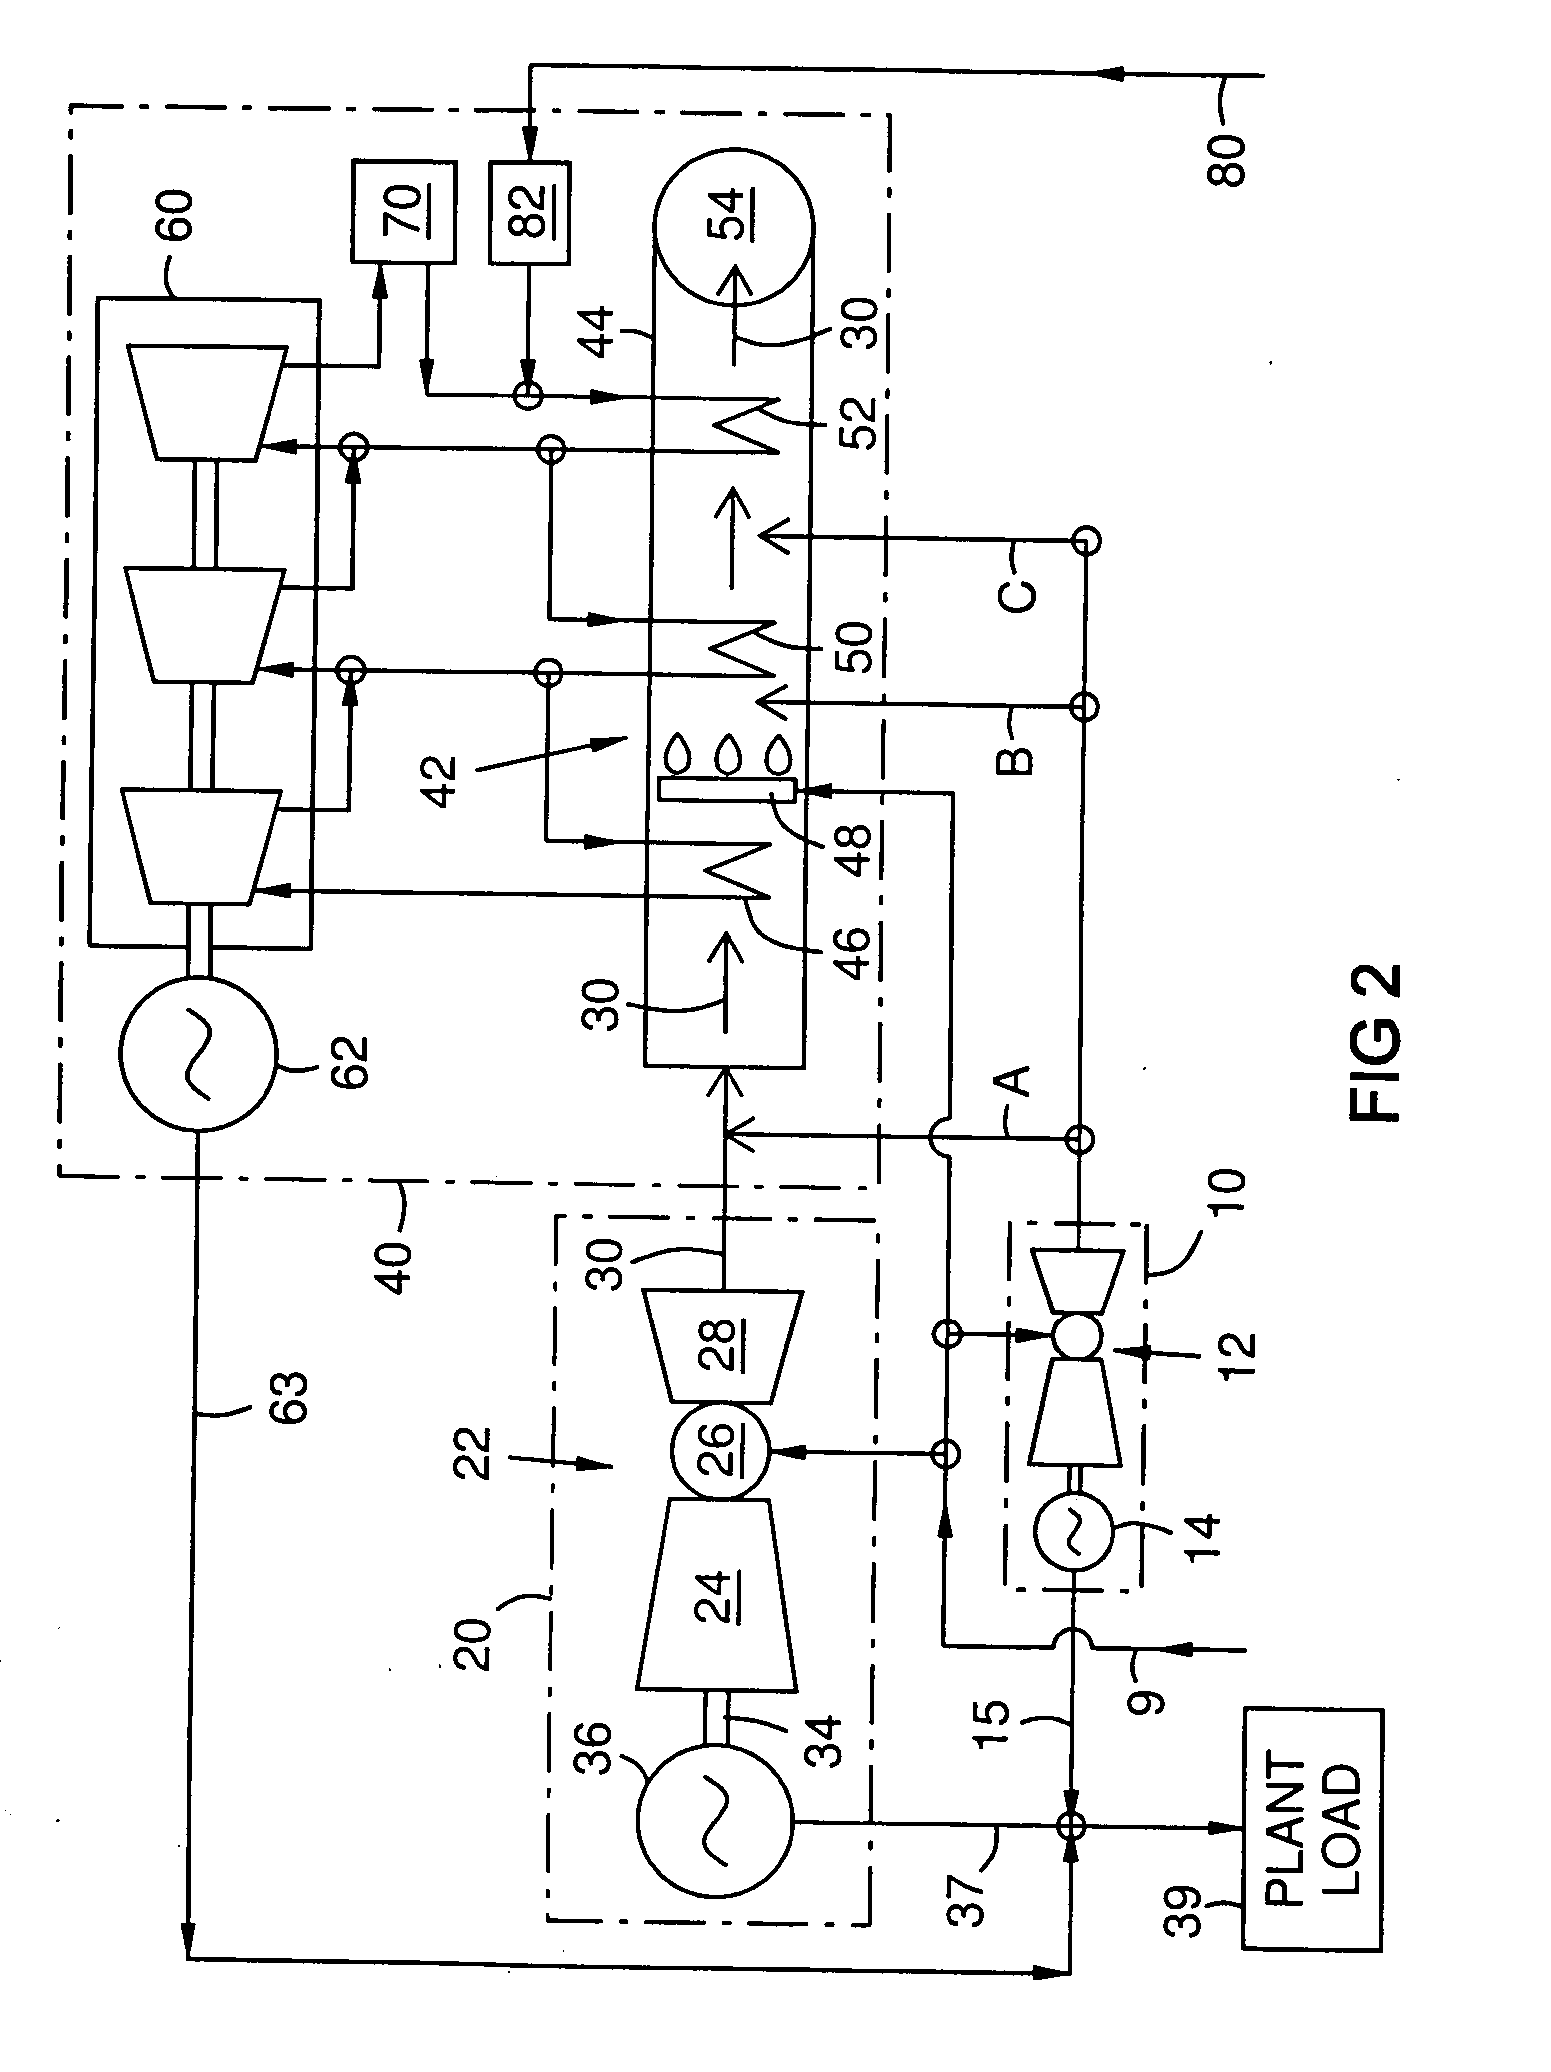 Exhaust heat augmentation in a combined cycle power plant